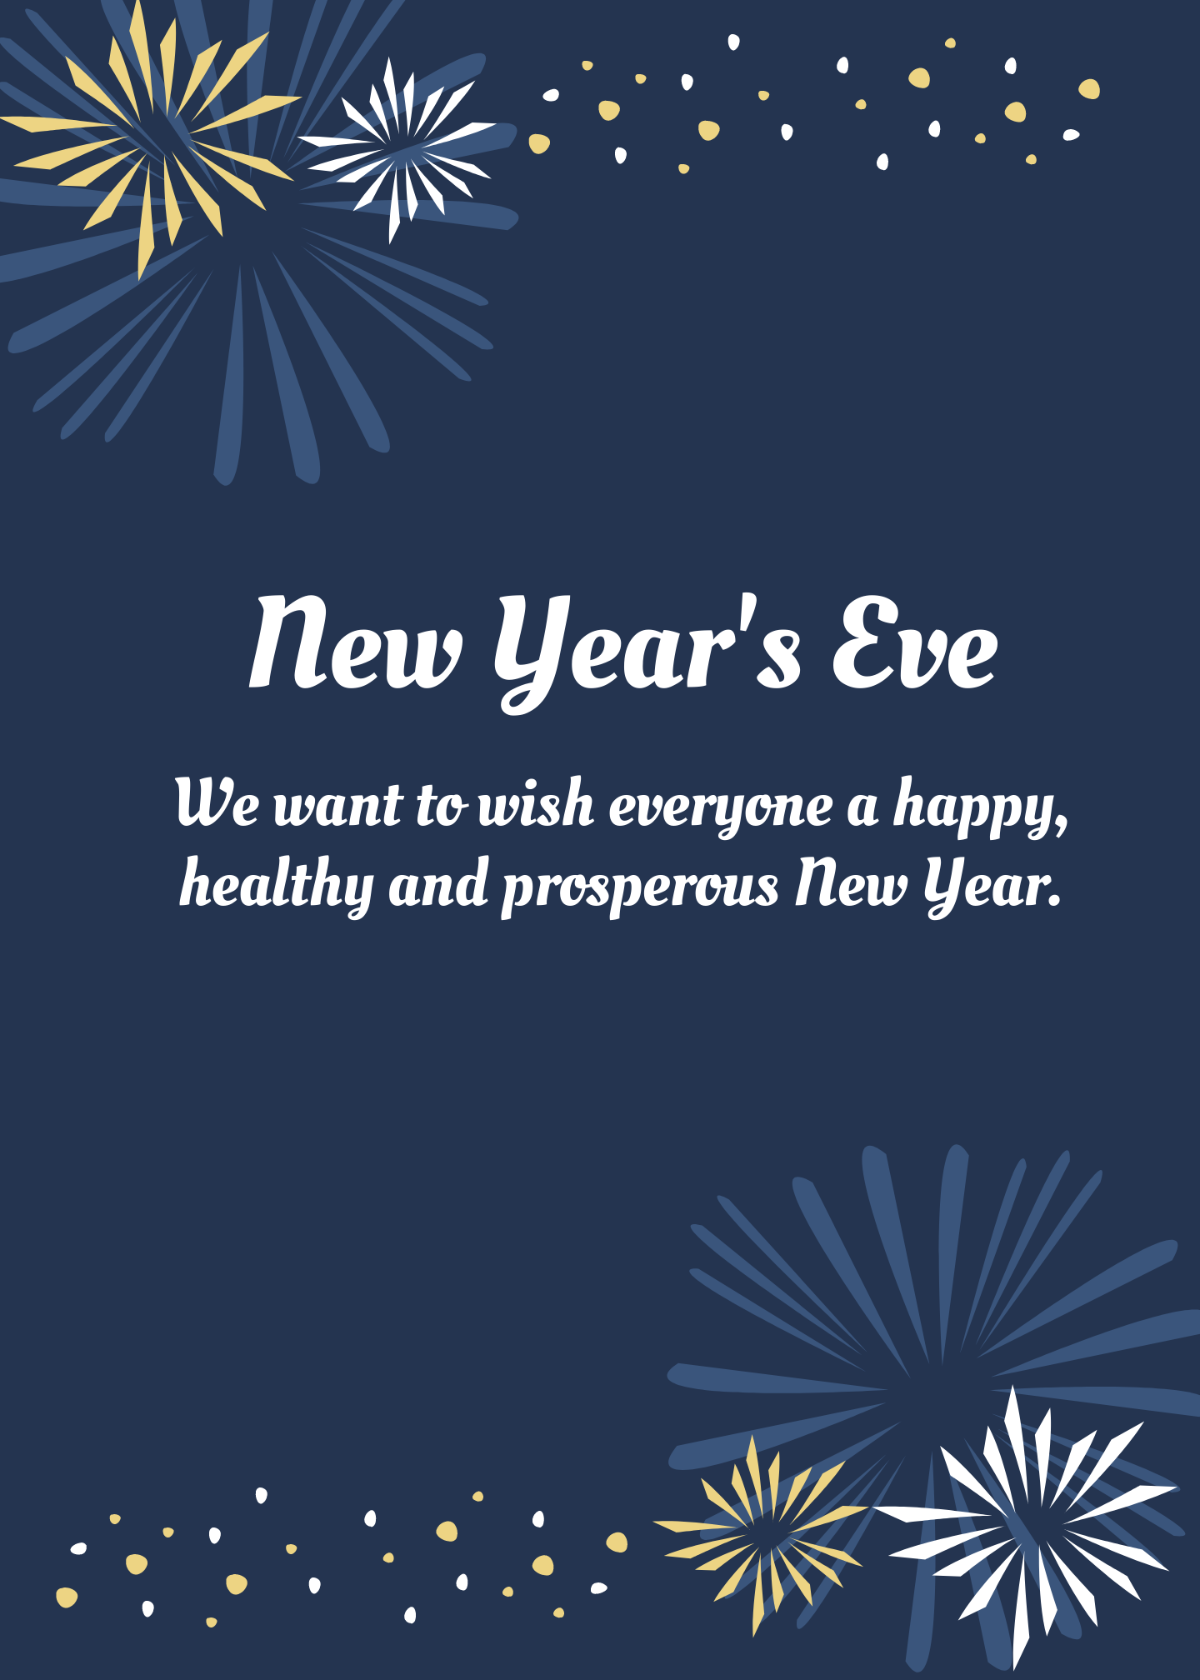 New Year’s Eve Wishes Template